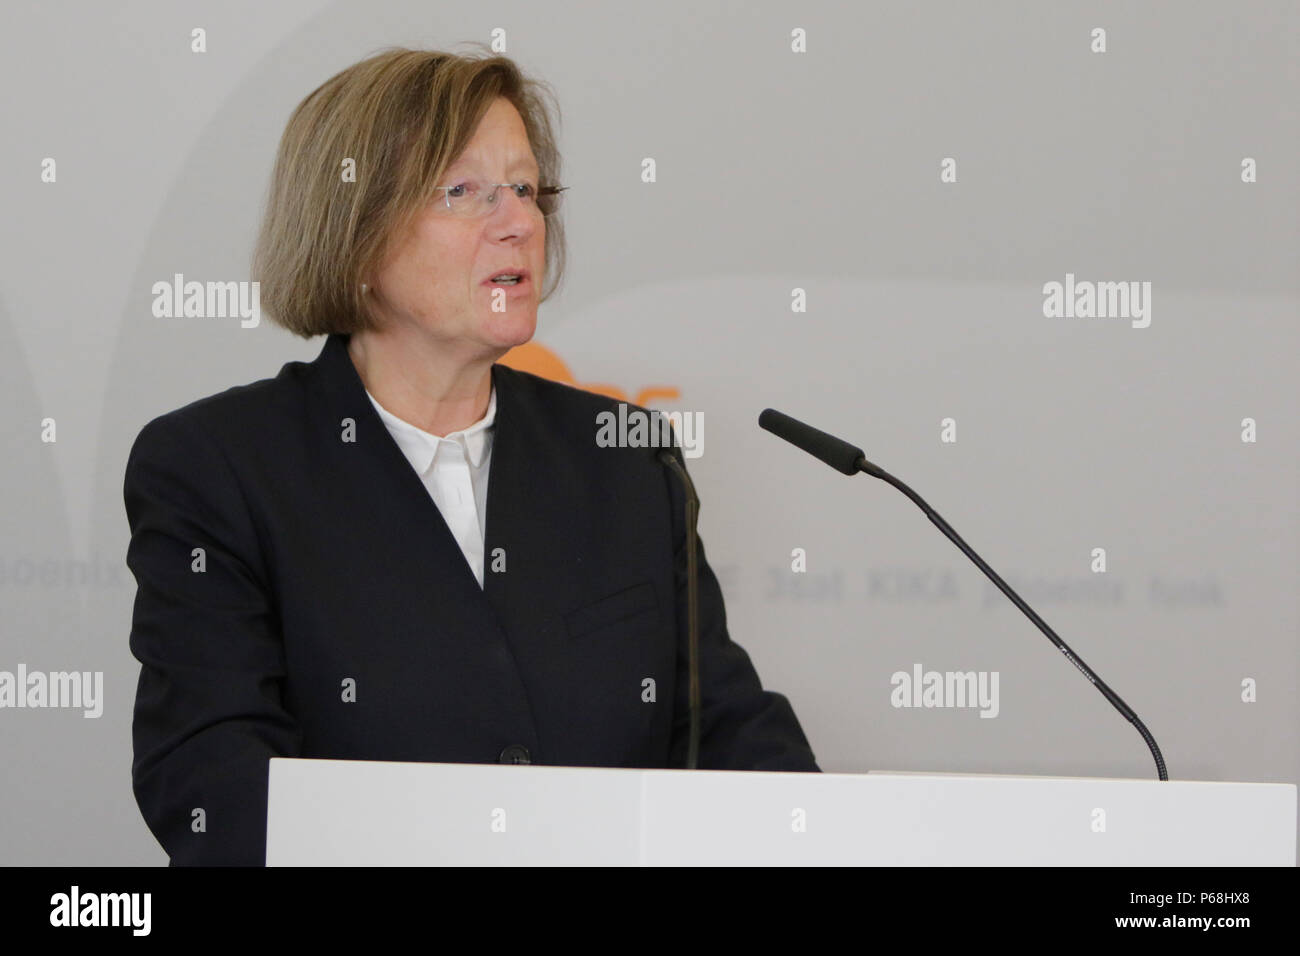 Mainz, Germany. 29th June 2018. Marlehn Thieme, the chairwoman of the ZDF Television Board (ZDF-Fernsehrat), addresses the press conference. The Television Board of the German public-service television broadcaster ZDF (Zweites Deutsches Fernsehen) met for their 9. meeting of its XV. term of office in Mainz. The chairwoman of the Television Board Marlehn Thieme was re-elected to her position in the scheduled midterm election of the 3 seats of the presidium. Credit: Michael Debets/Alamy Live News Stock Photo